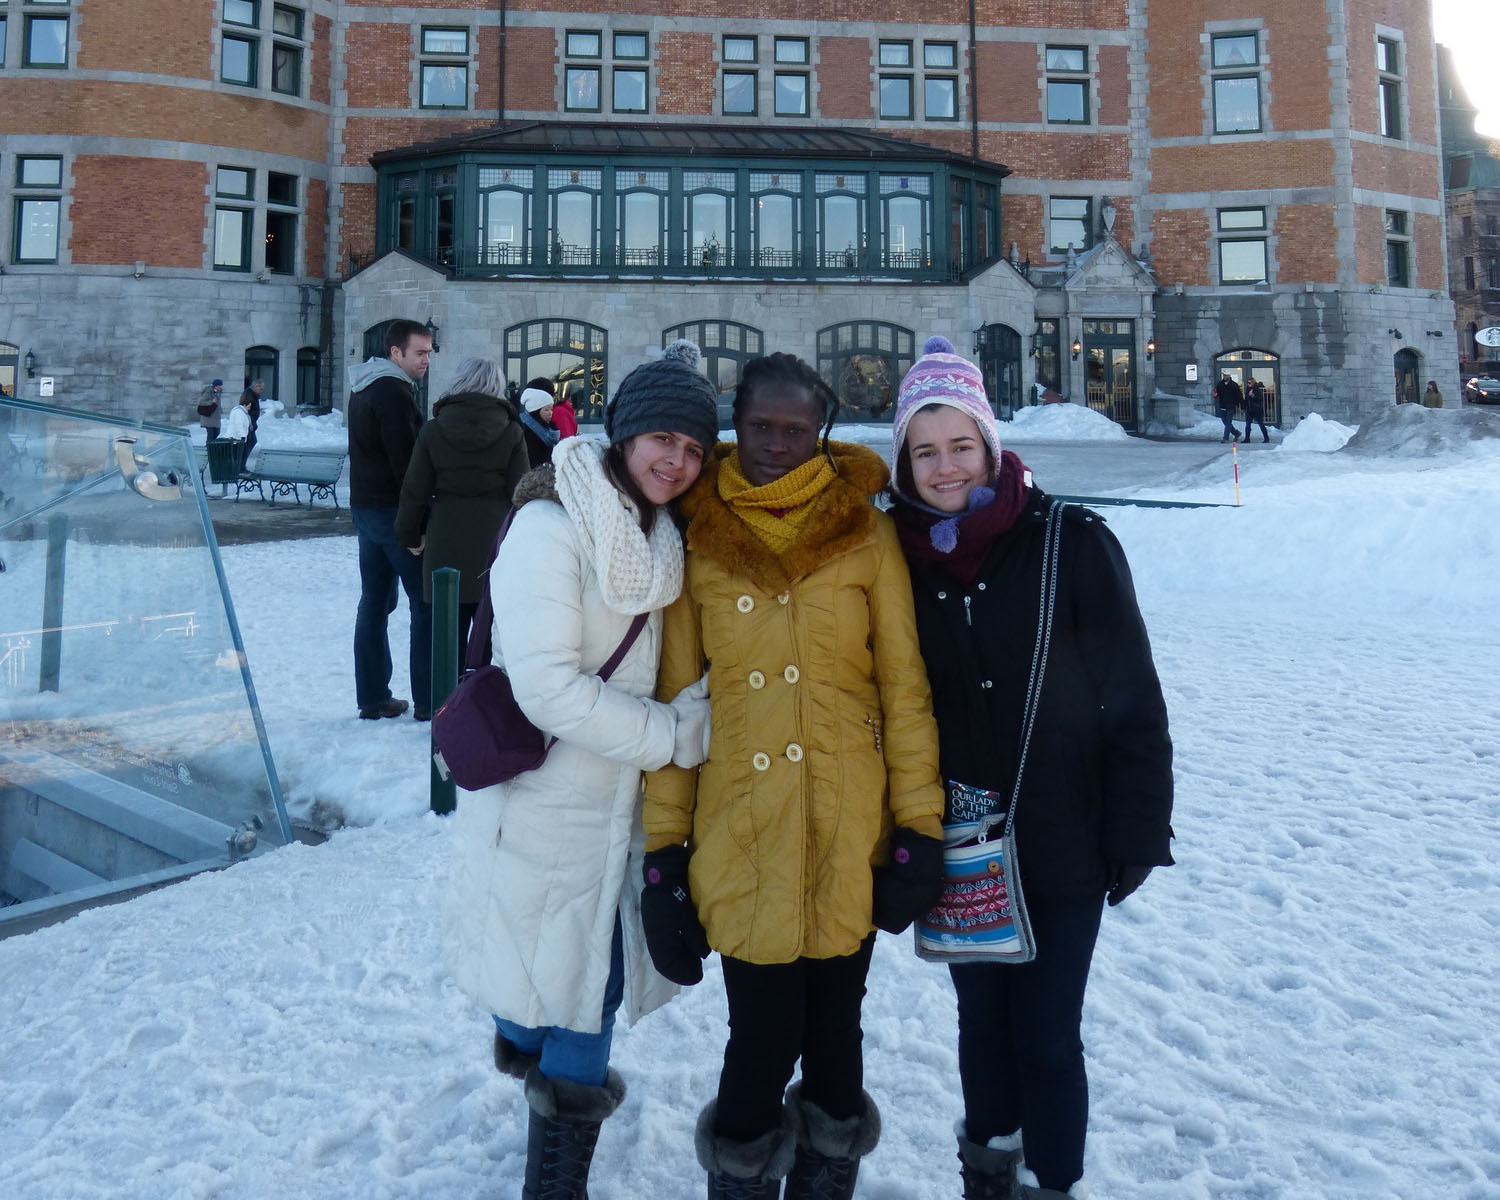 Three people in winter coats stand in the snow in front of a city building